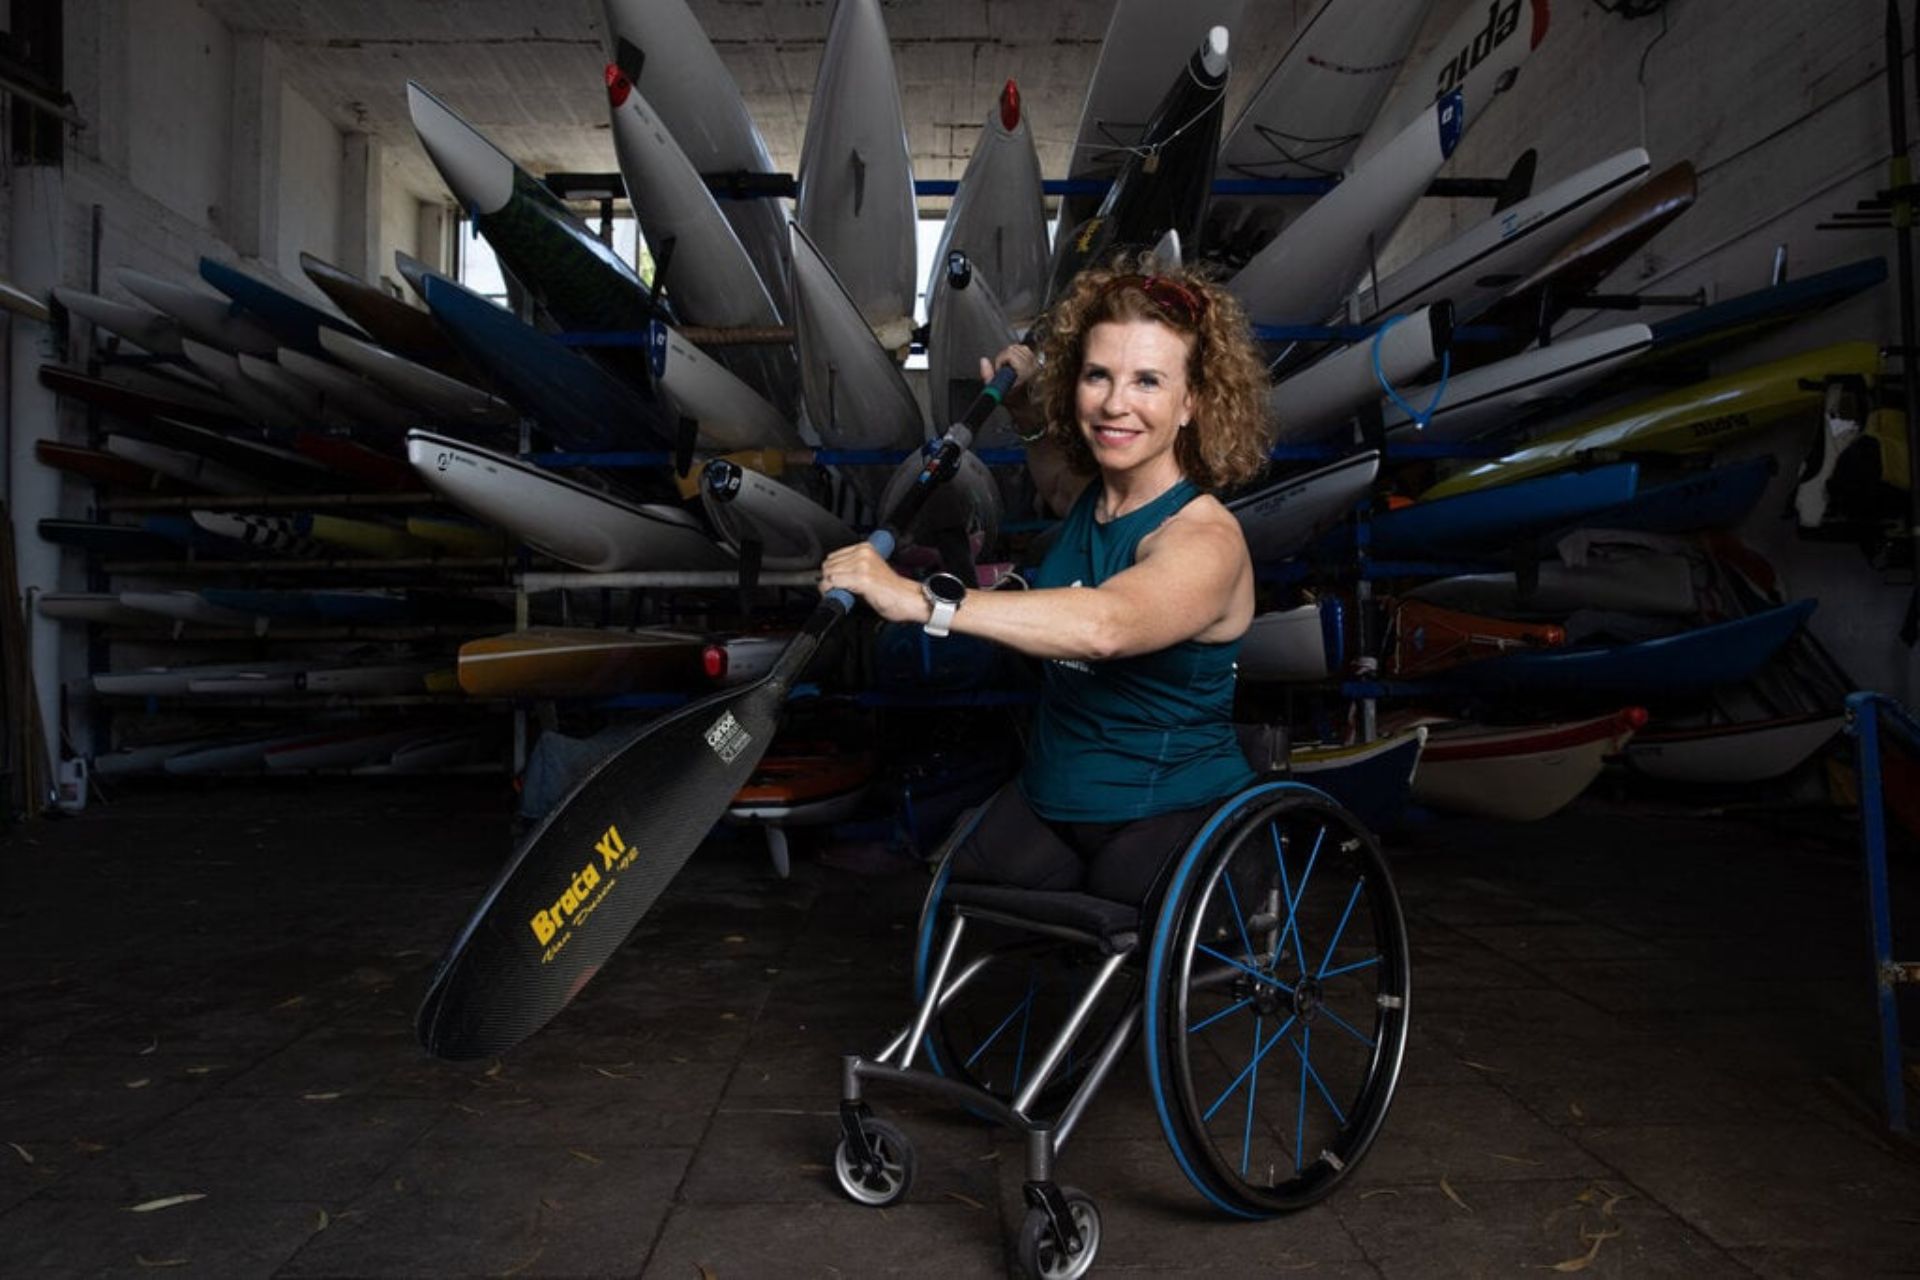 Pascale Bercovitch holding oars smiling at the camera